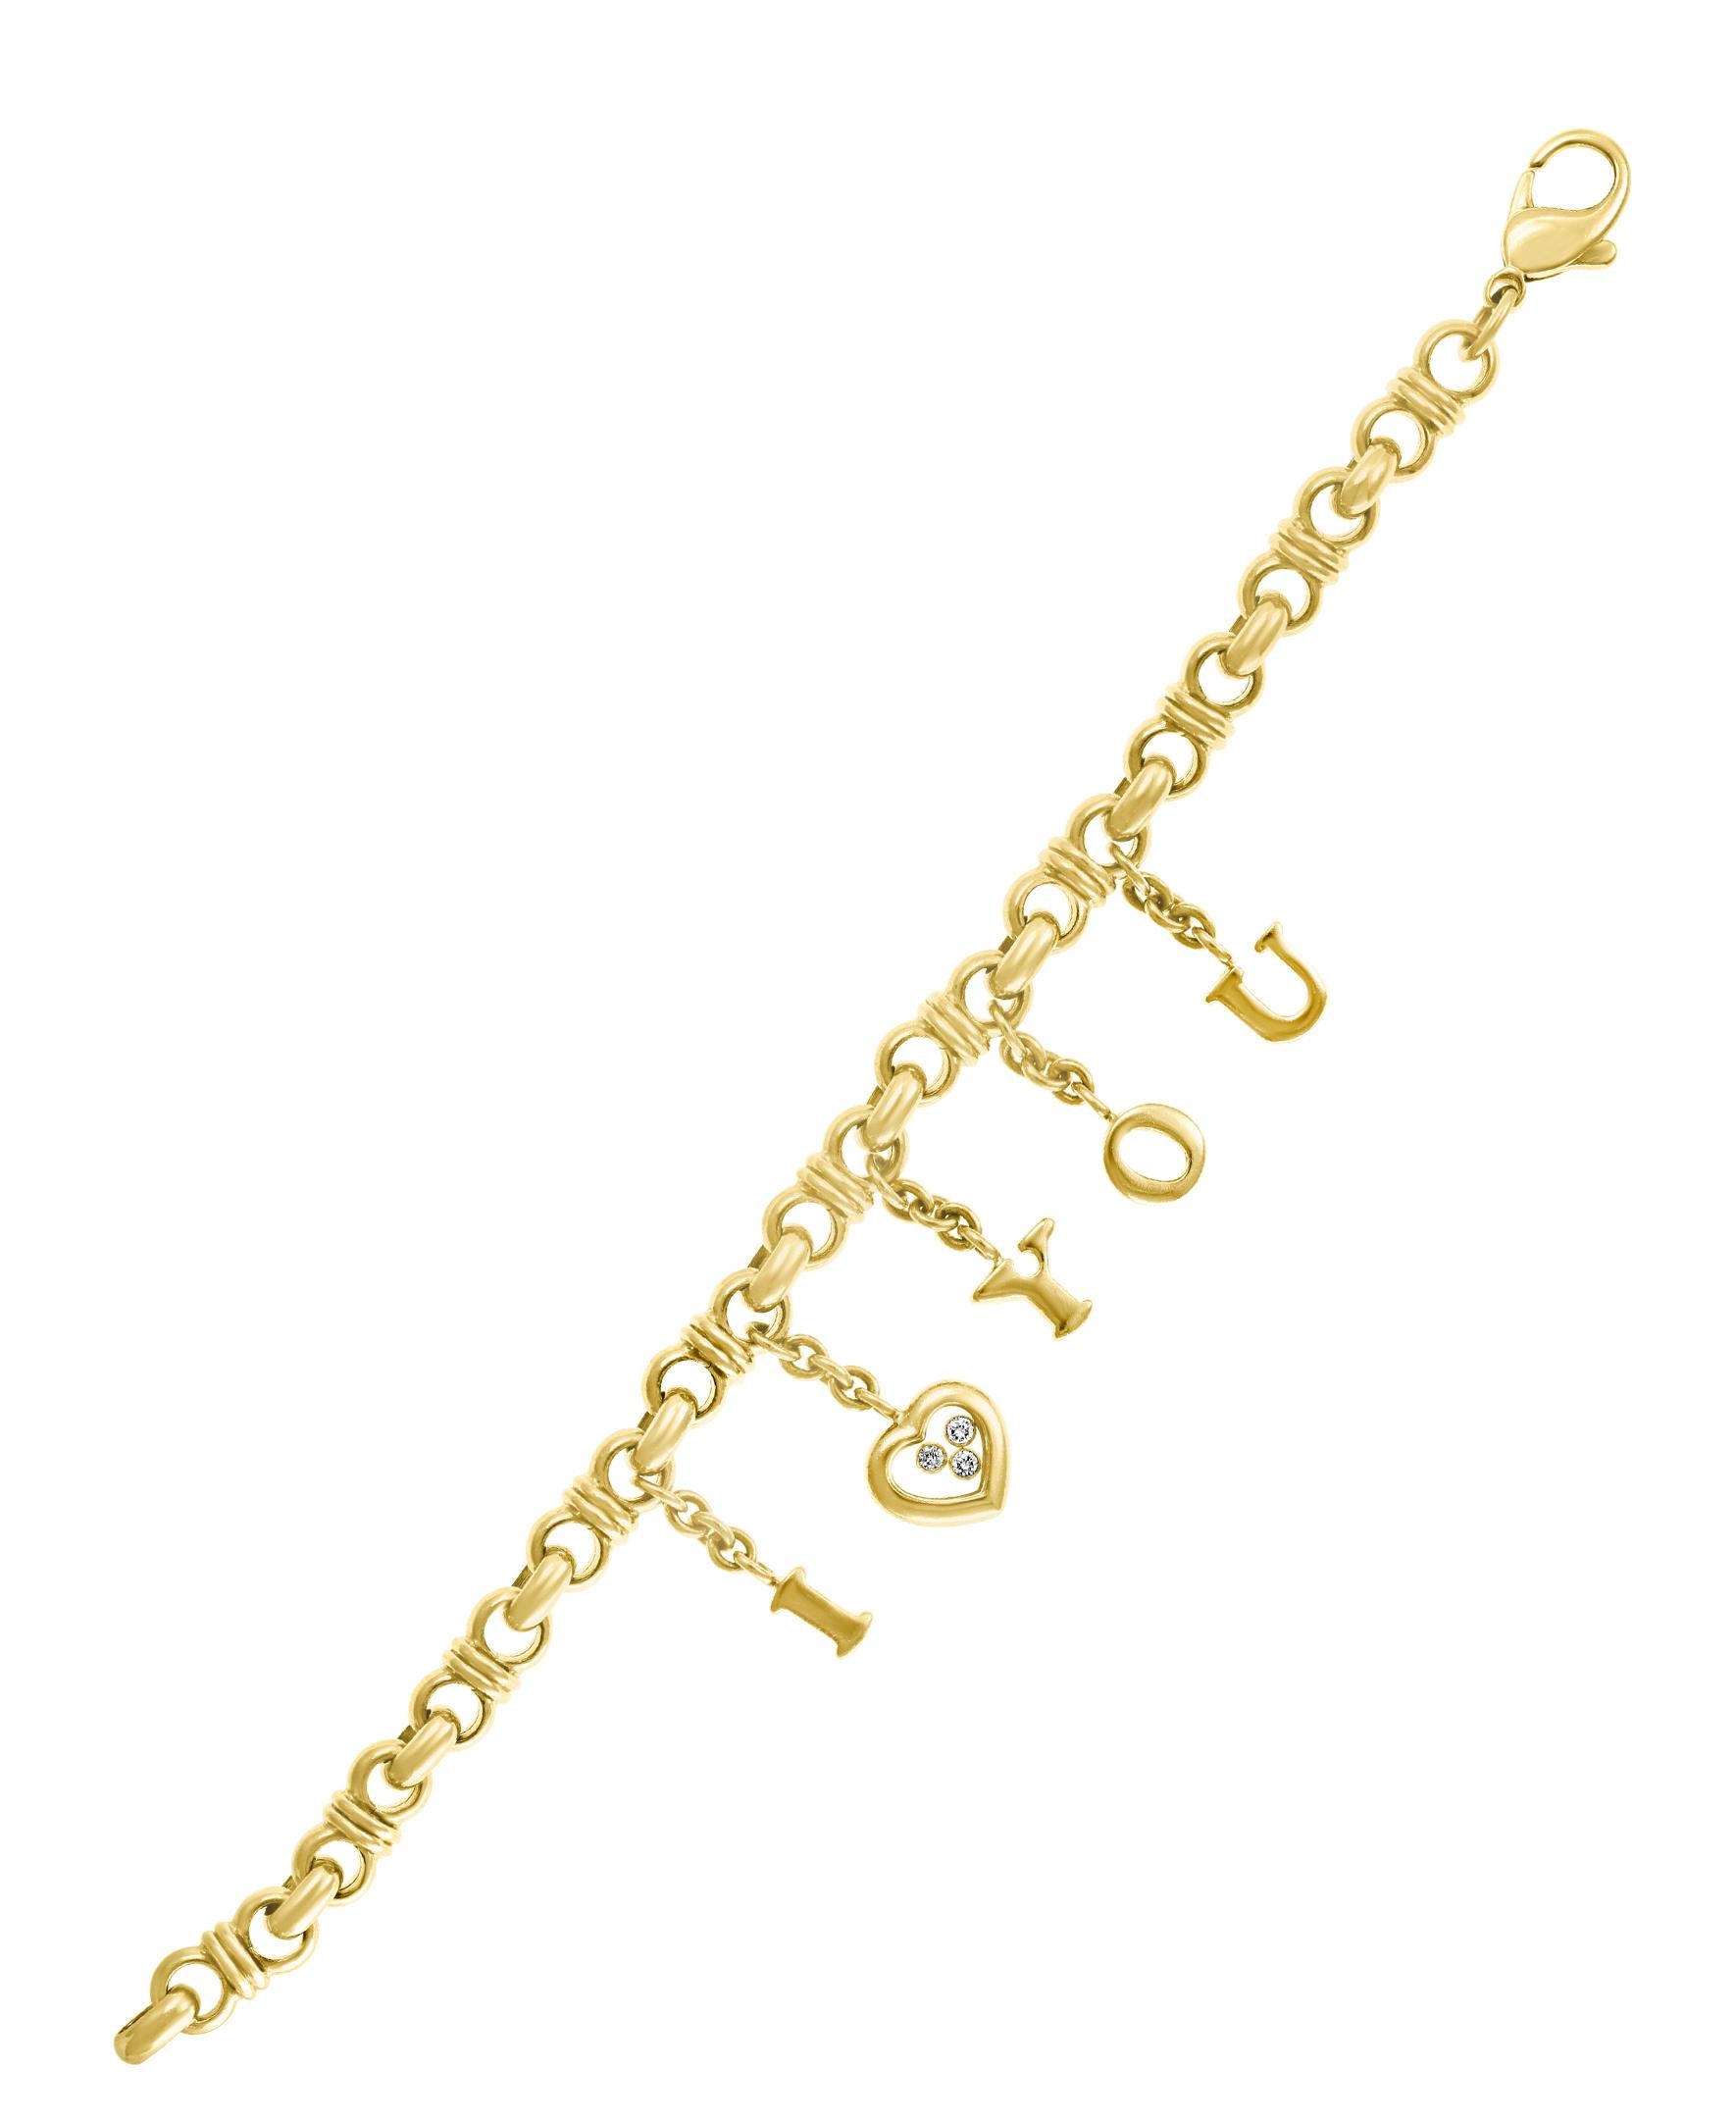 
GORGEOUS!! 18 Karat Yellow Gold Designer  Chopard Happy Diamond “I Love you” Drop Charm Bracelet
Charms are hanging from 18 K gold chain Bracelet.
18 K Yellow Gold 37 Grams
The Diamond weighs 15 points of F-VS1 Quality 
Three floating diamond ,